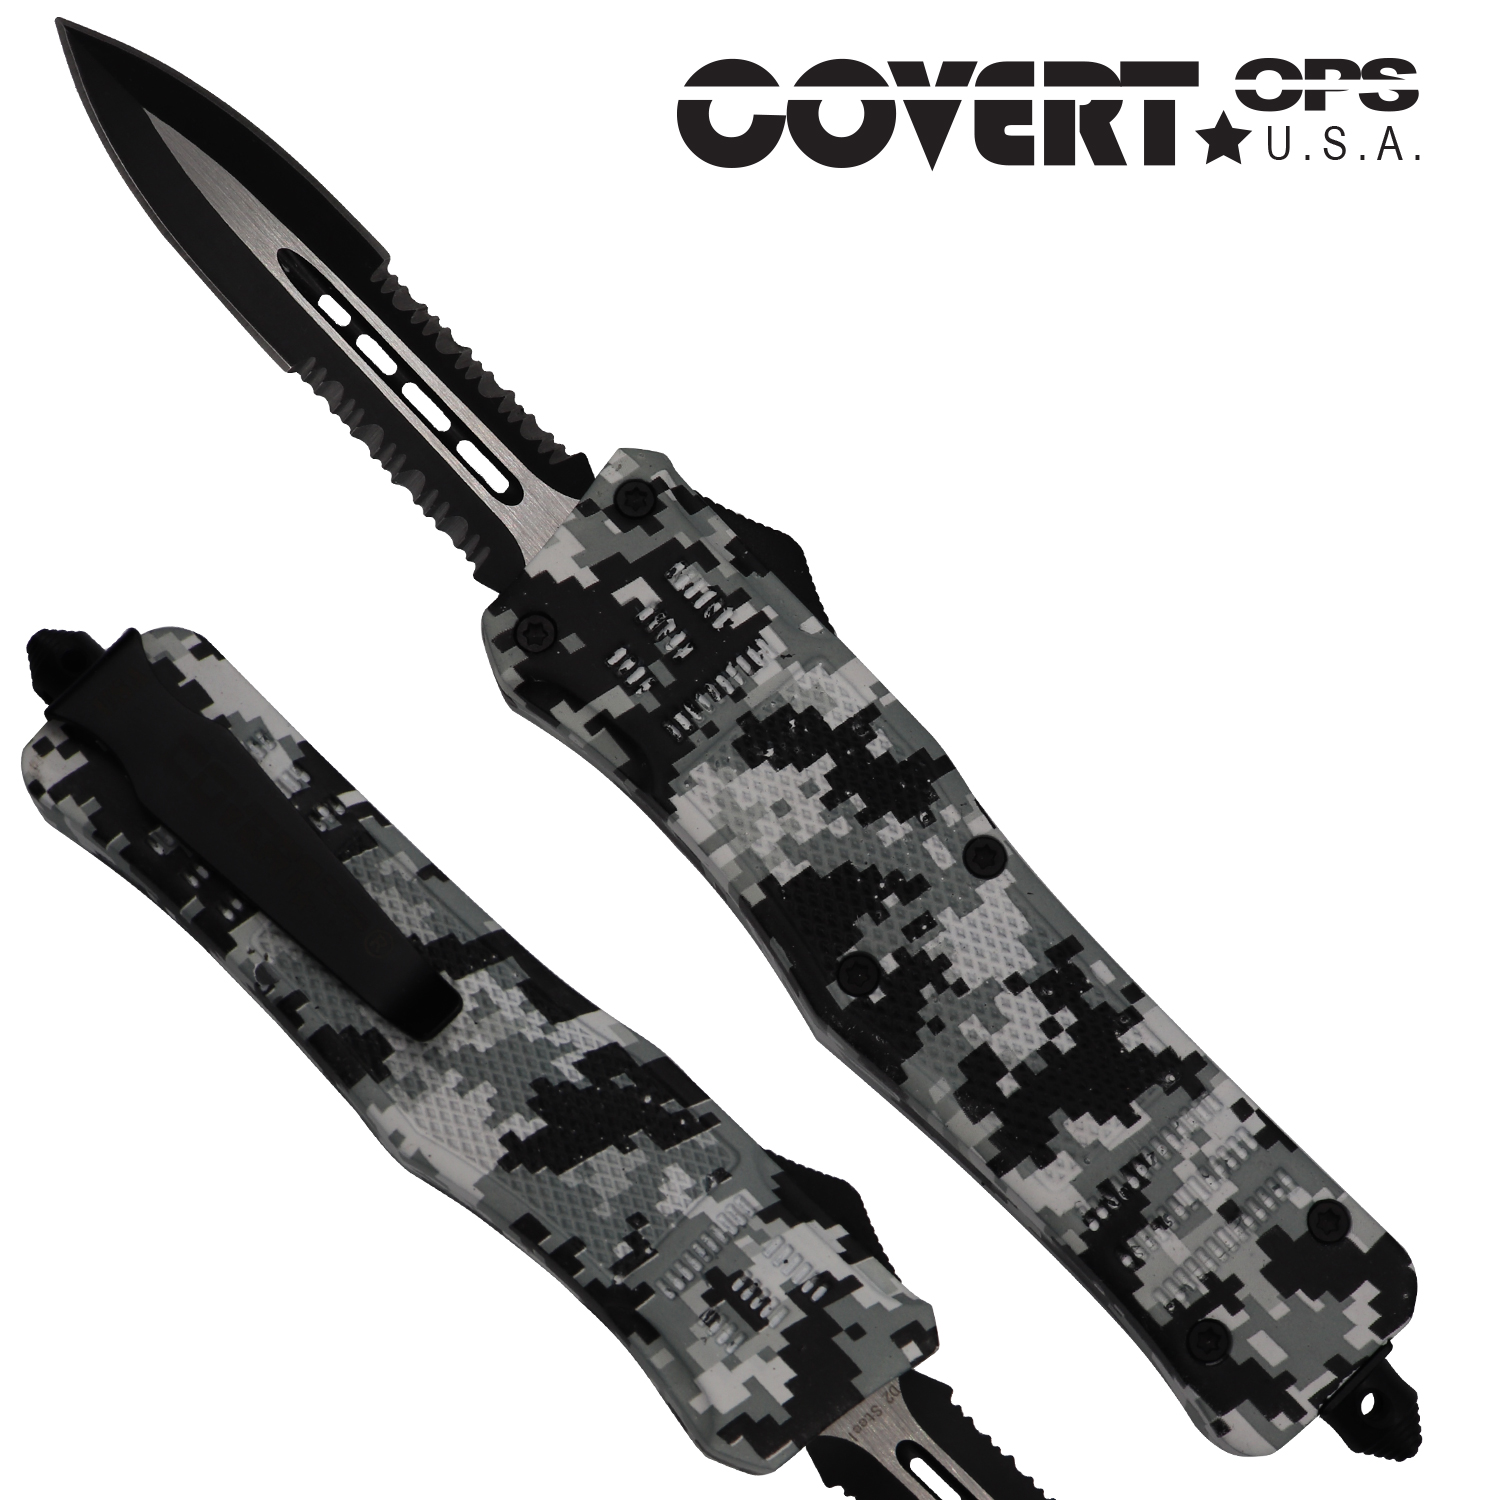 Covert OPS USA OTF Automatic Knife 9 inch overall Snow Camo Handle Two Tone Double Edge D2 Steel Blade